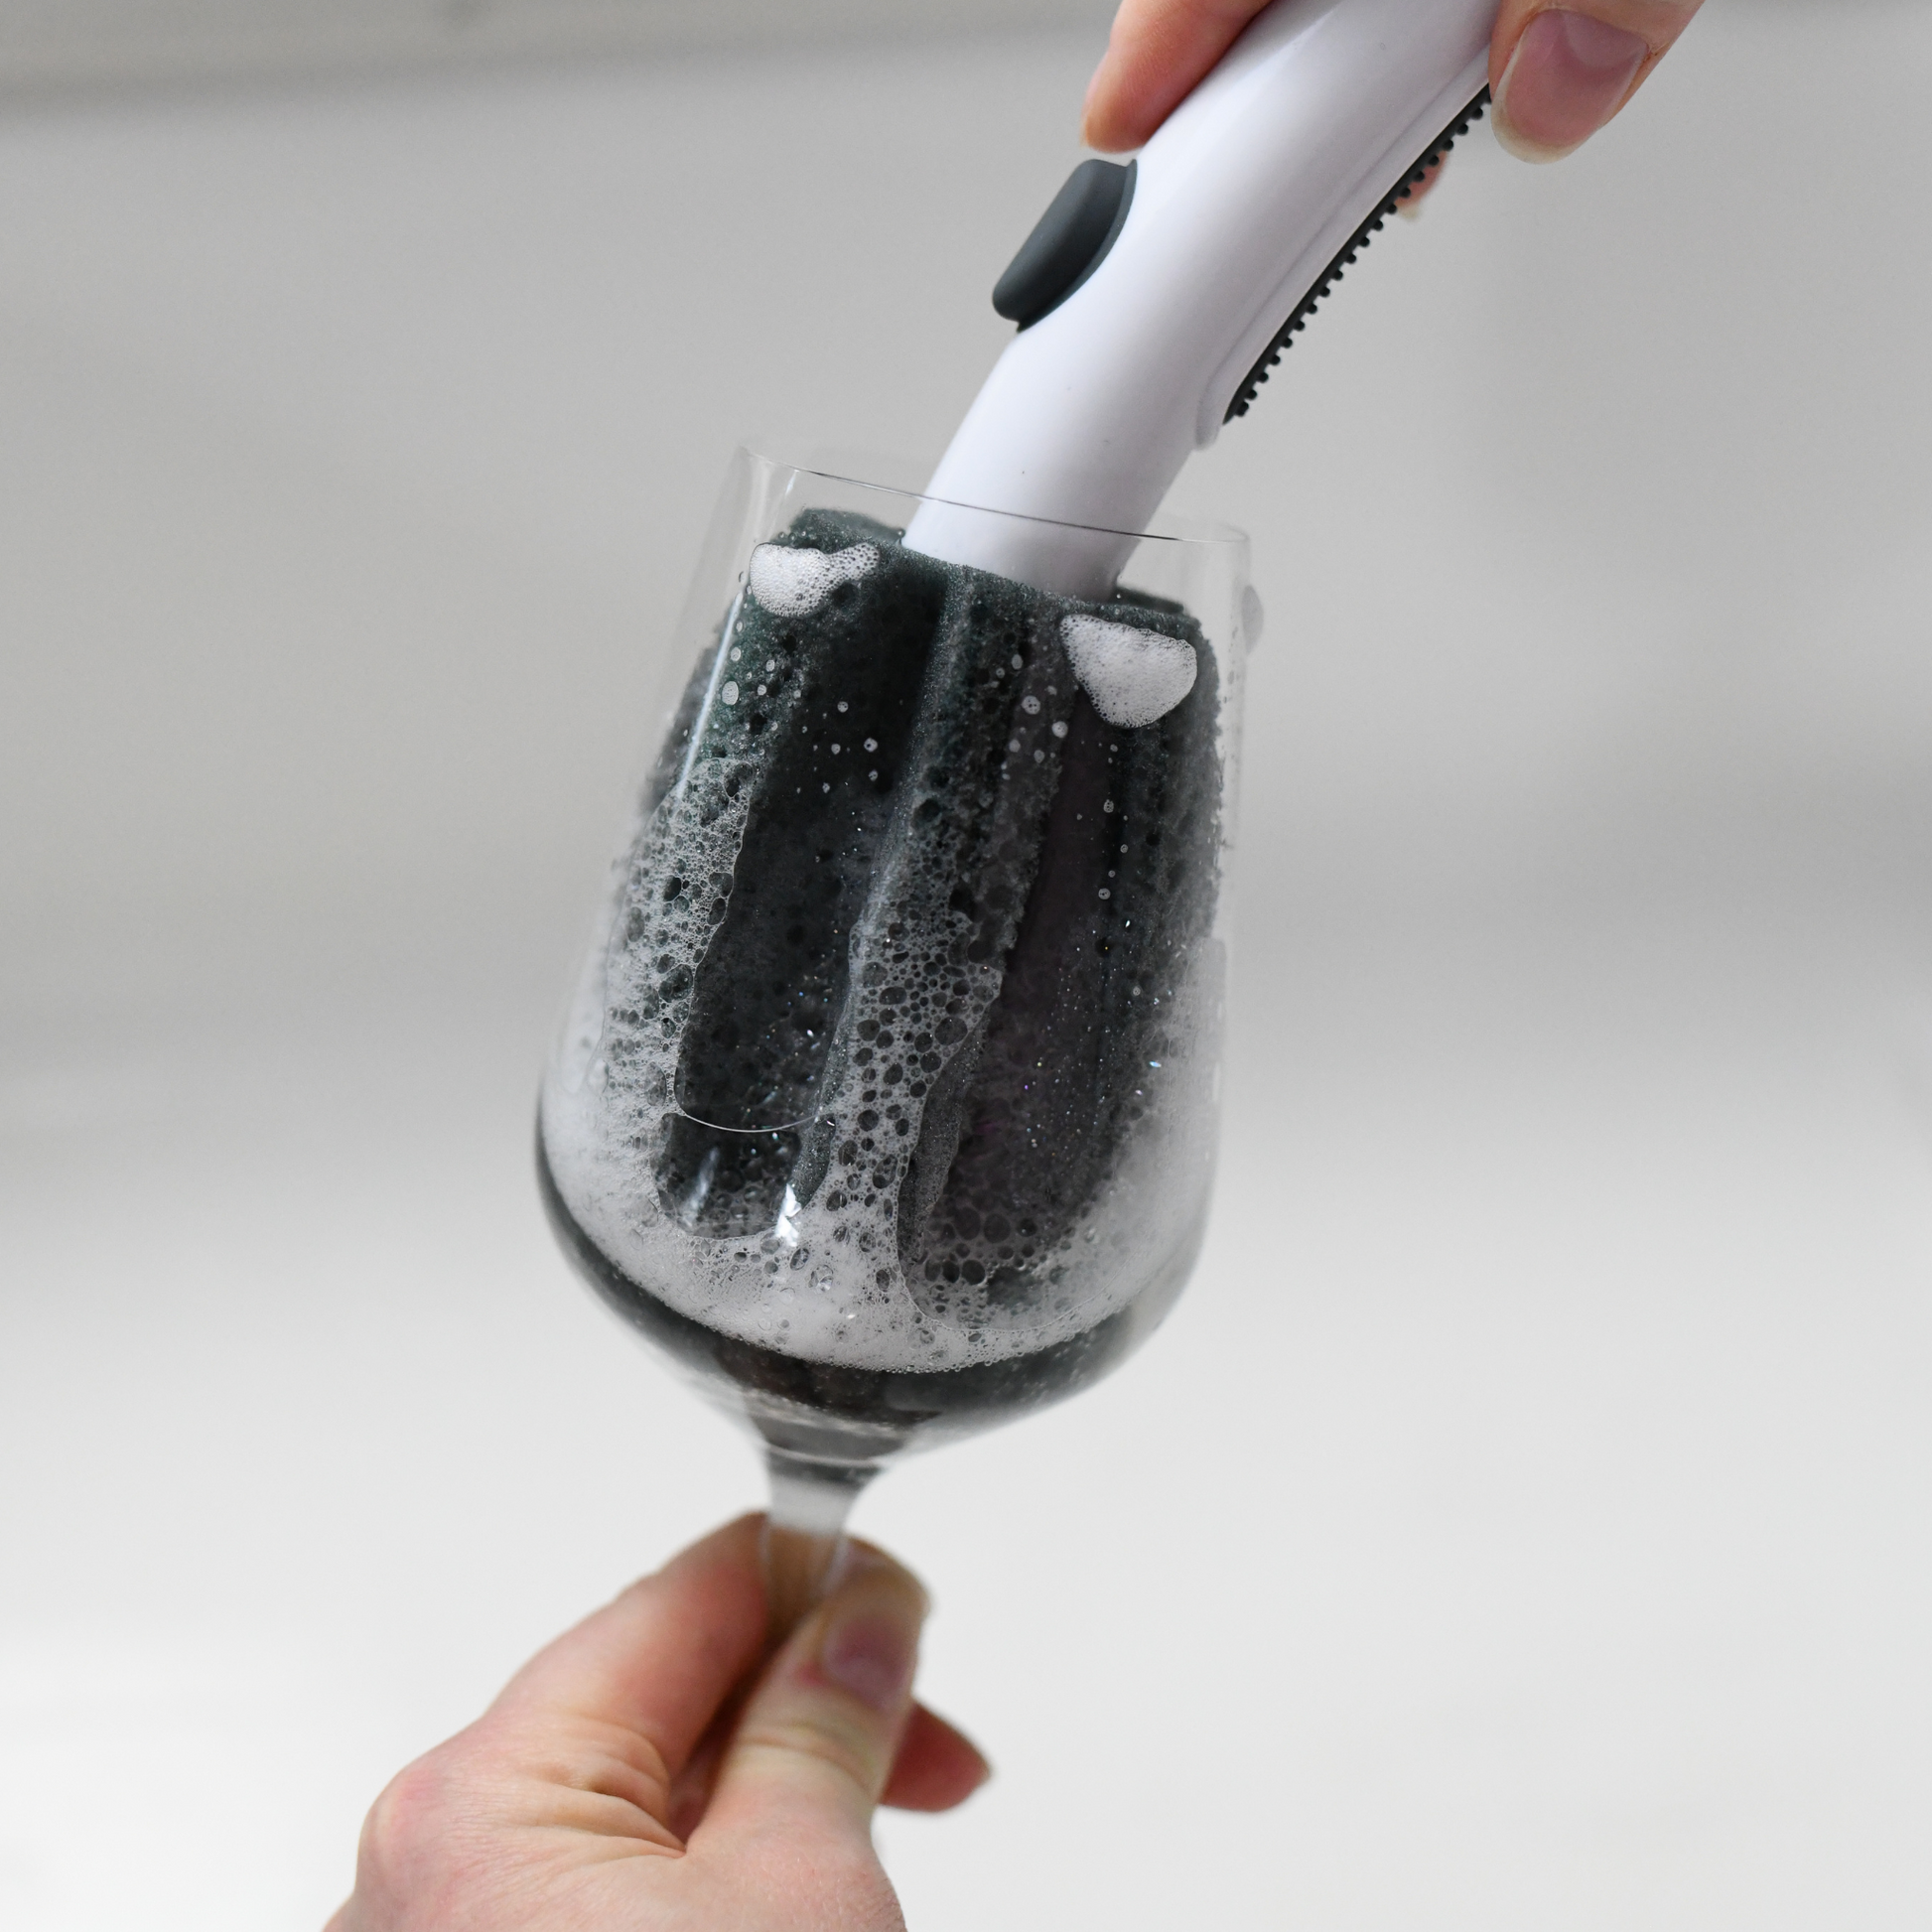 Easily cleans both large and small wine glasses